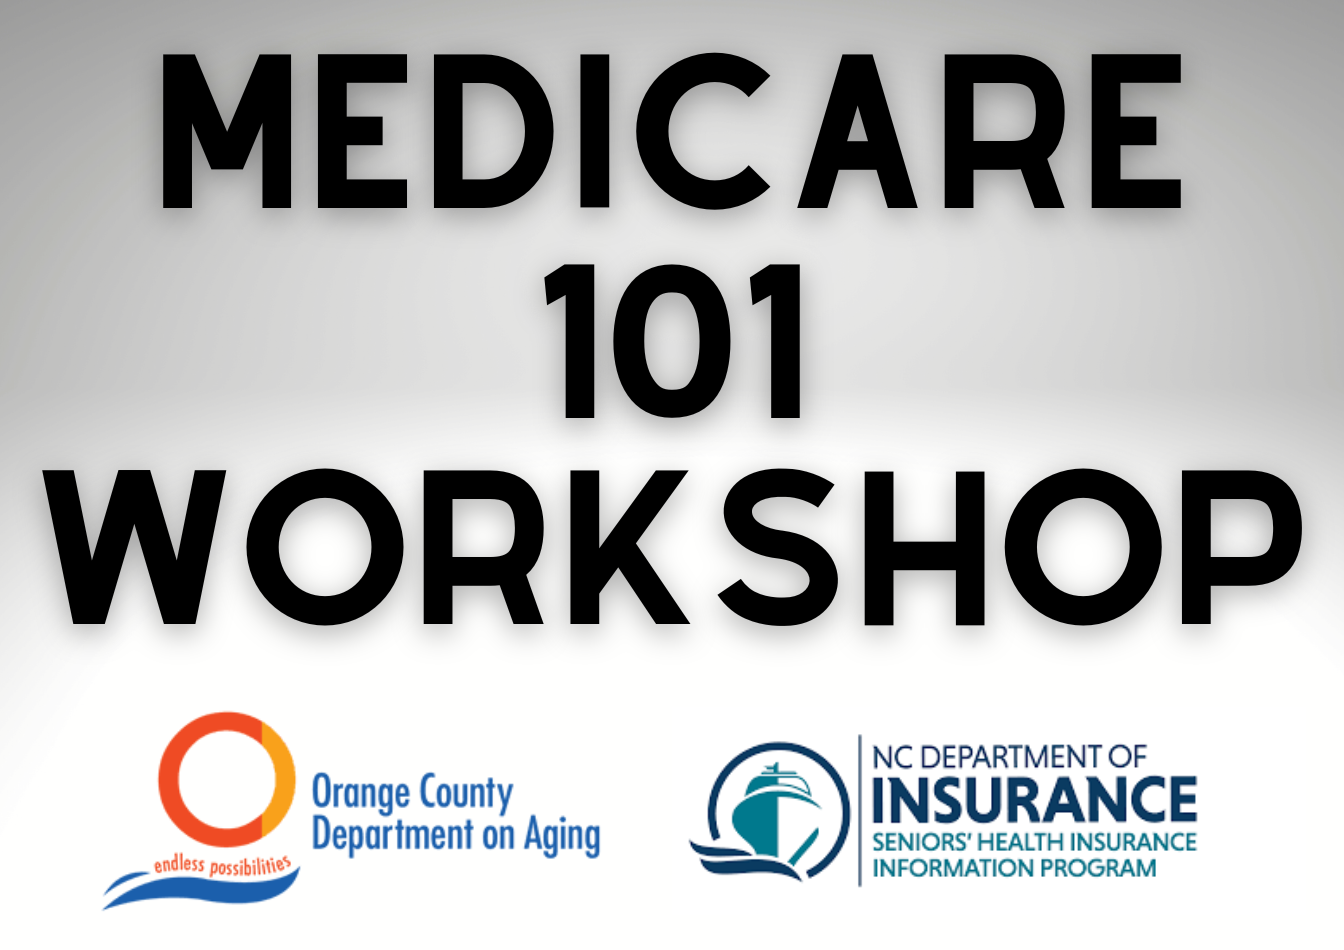 Image with text: Medicare 101 Workshop. Dept on Aging and SHIIP logos